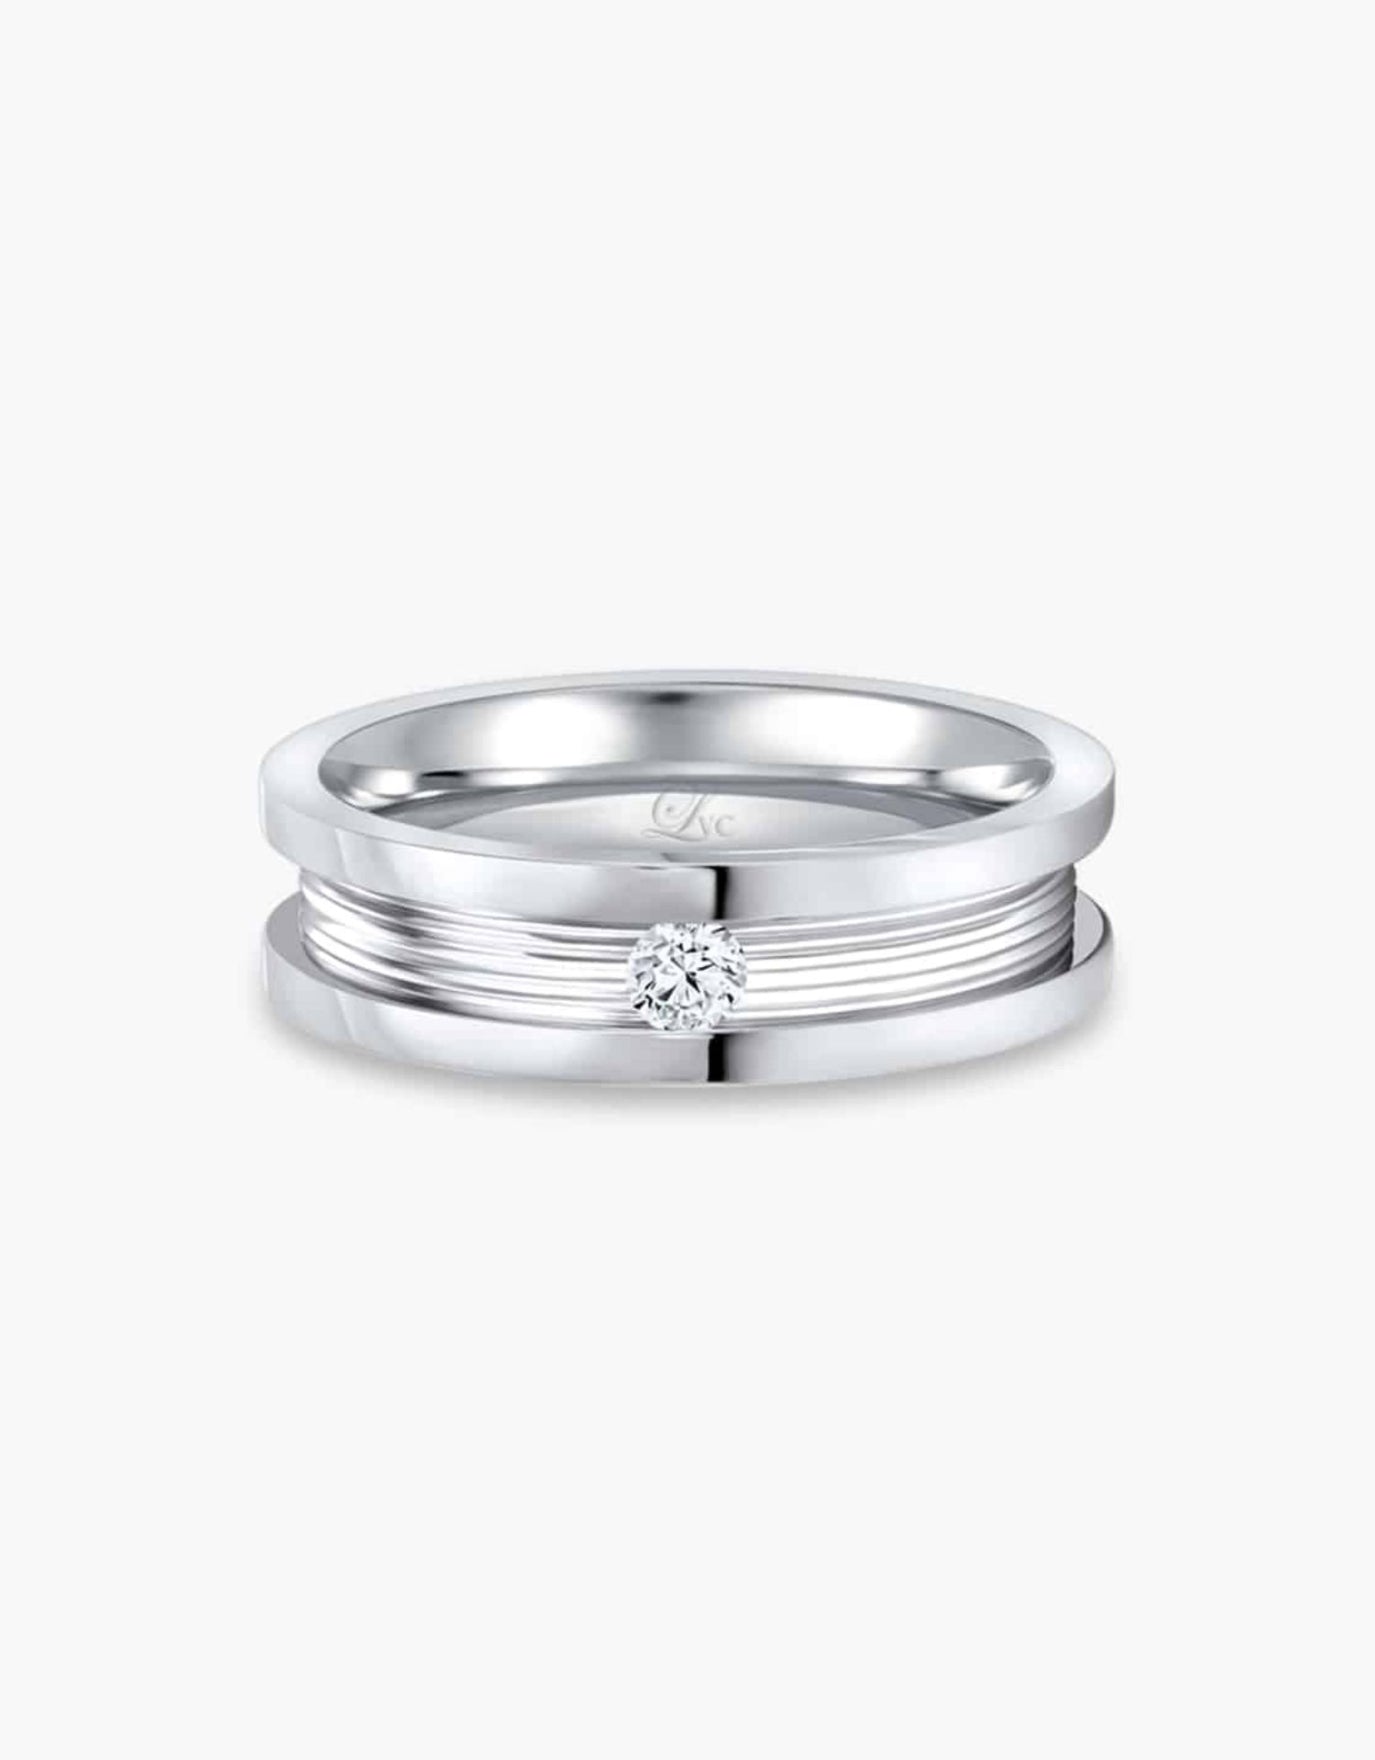 LVC Promise One Wedding Band with Center Diamond Solitaire